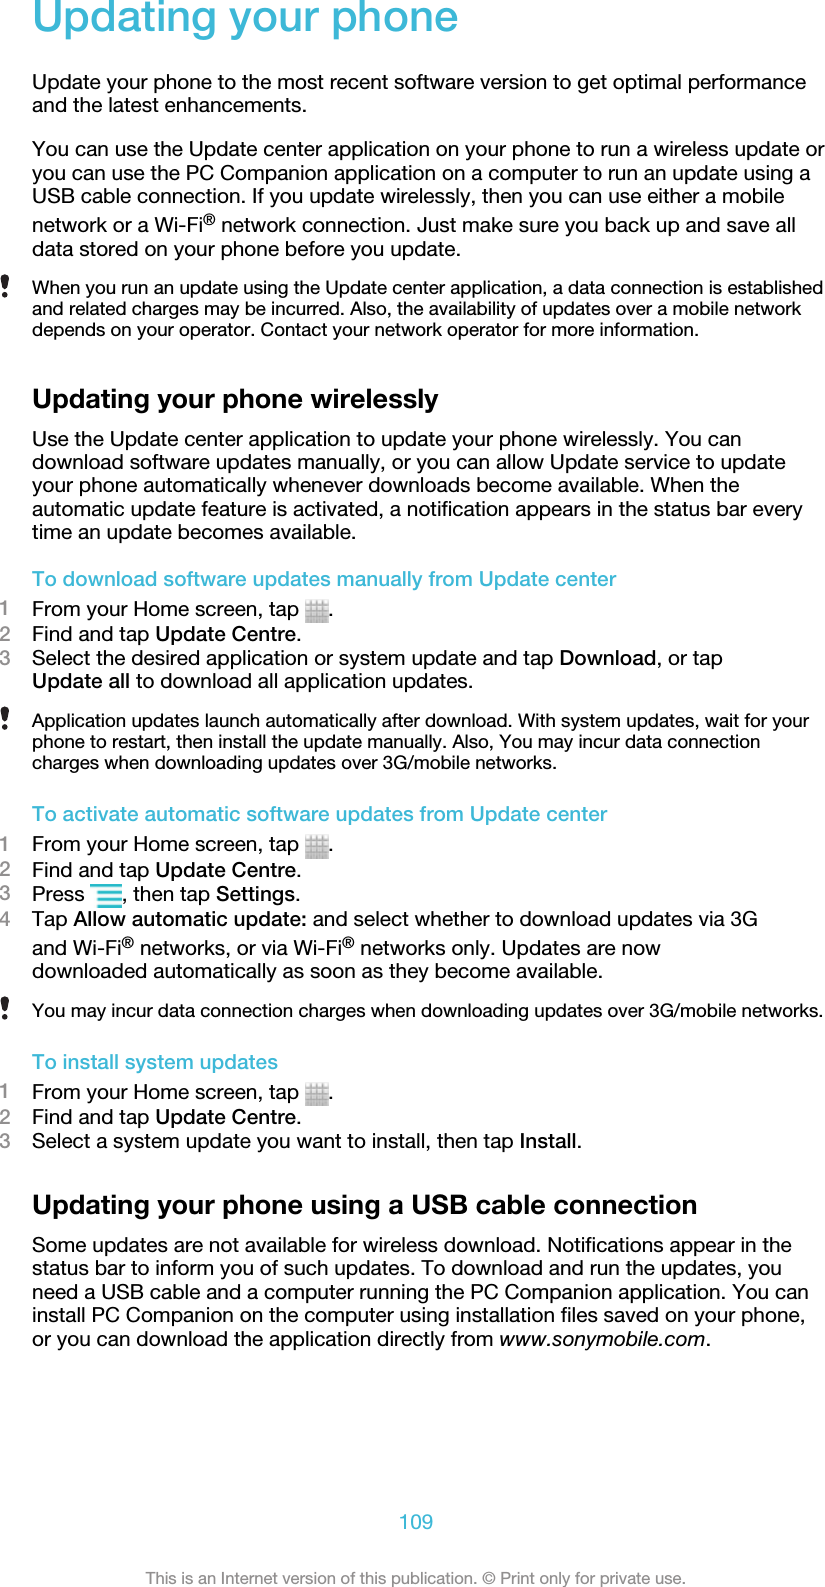 Updating your phoneUpdate your phone to the most recent software version to get optimal performanceand the latest enhancements.You can use the Update center application on your phone to run a wireless update oryou can use the PC Companion application on a computer to run an update using aUSB cable connection. If you update wirelessly, then you can use either a mobilenetwork or a Wi-Fi® network connection. Just make sure you back up and save alldata stored on your phone before you update.When you run an update using the Update center application, a data connection is establishedand related charges may be incurred. Also, the availability of updates over a mobile networkdepends on your operator. Contact your network operator for more information.Updating your phone wirelesslyUse the Update center application to update your phone wirelessly. You candownload software updates manually, or you can allow Update service to updateyour phone automatically whenever downloads become available. When theautomatic update feature is activated, a notification appears in the status bar everytime an update becomes available.To download software updates manually from Update center1From your Home screen, tap  .2Find and tap Update Centre.3Select the desired application or system update and tap Download, or tapUpdate all to download all application updates.Application updates launch automatically after download. With system updates, wait for yourphone to restart, then install the update manually. Also, You may incur data connectioncharges when downloading updates over 3G/mobile networks.To activate automatic software updates from Update center1From your Home screen, tap  .2Find and tap Update Centre.3Press  , then tap Settings.4Tap Allow automatic update: and select whether to download updates via 3Gand Wi-Fi® networks, or via Wi-Fi® networks only. Updates are nowdownloaded automatically as soon as they become available.You may incur data connection charges when downloading updates over 3G/mobile networks.To install system updates1From your Home screen, tap  .2Find and tap Update Centre.3Select a system update you want to install, then tap Install.Updating your phone using a USB cable connectionSome updates are not available for wireless download. Notifications appear in thestatus bar to inform you of such updates. To download and run the updates, youneed a USB cable and a computer running the PC Companion application. You caninstall PC Companion on the computer using installation files saved on your phone,or you can download the application directly from www.sonymobile.com.109This is an Internet version of this publication. © Print only for private use.